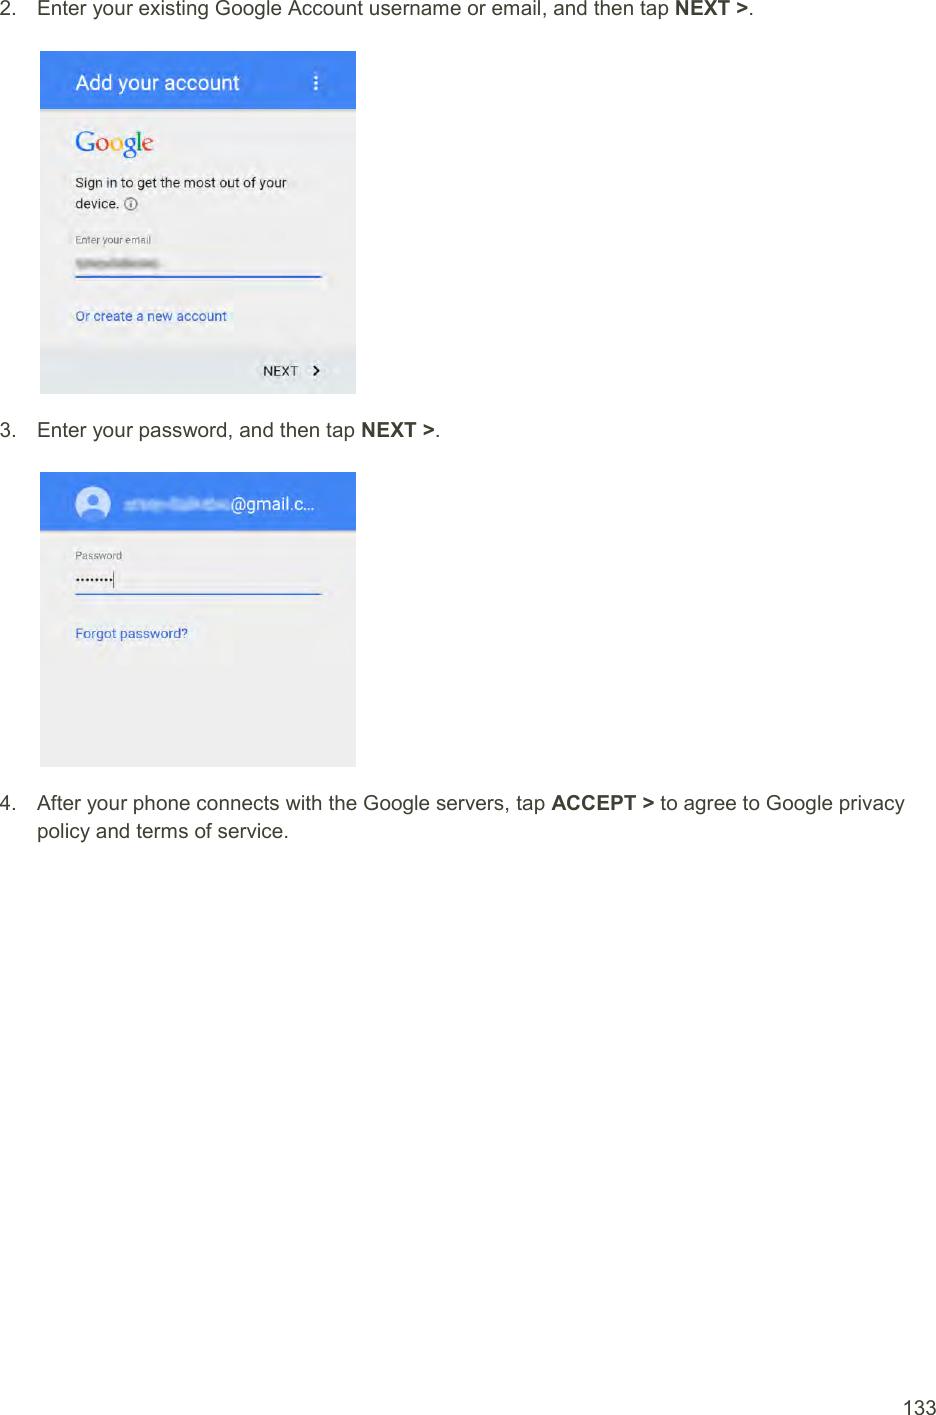  133 2.  Enter your existing Google Account username or email, and then tap NEXT &gt;.   3.  Enter your password, and then tap NEXT &gt;.   4.  After your phone connects with the Google servers, tap ACCEPT &gt; to agree to Google privacy policy and terms of service. 